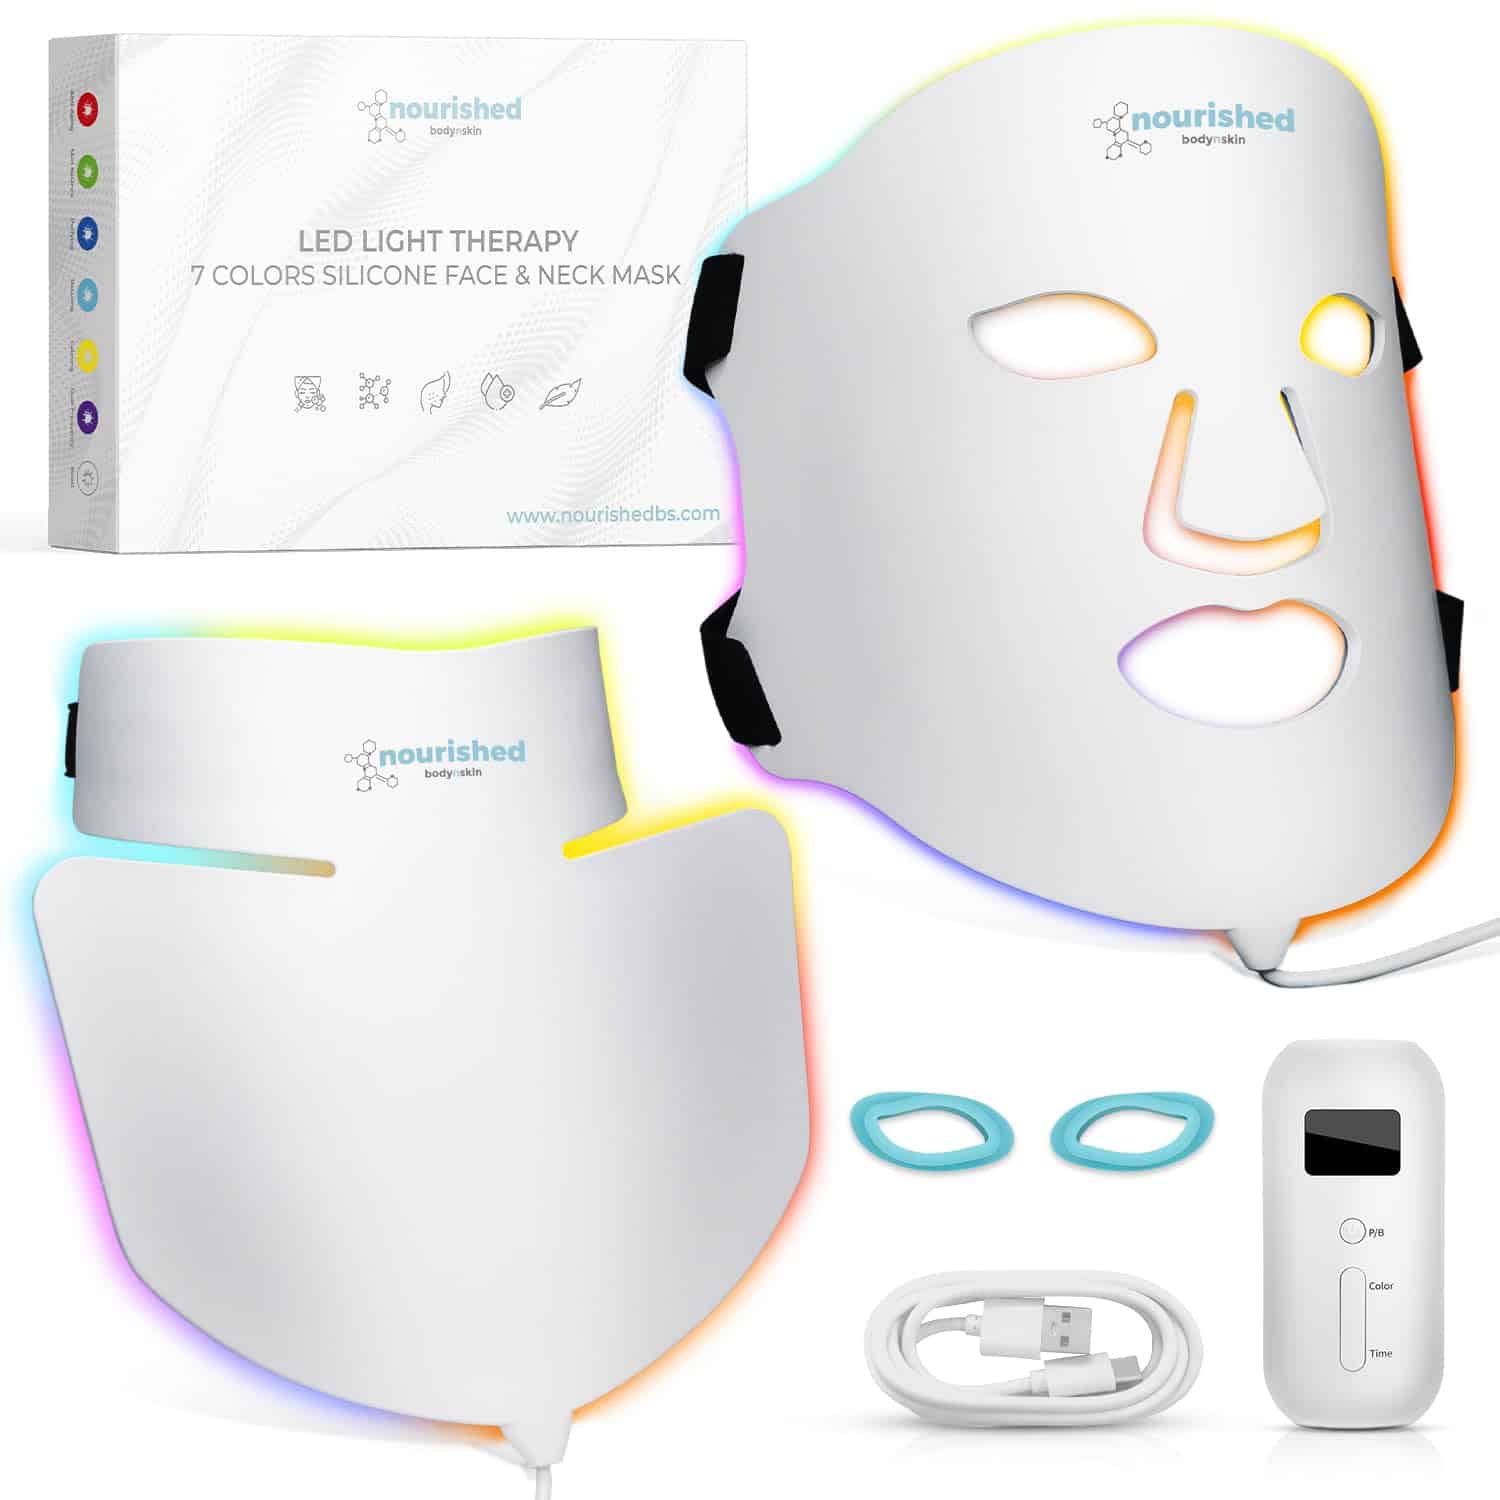 LED Light Therapy Face  Neck Mask - Facial Skin Care Device - 7 Colors Red  Blue - Rejuvenation, Anti-aging Product for Wrinkles